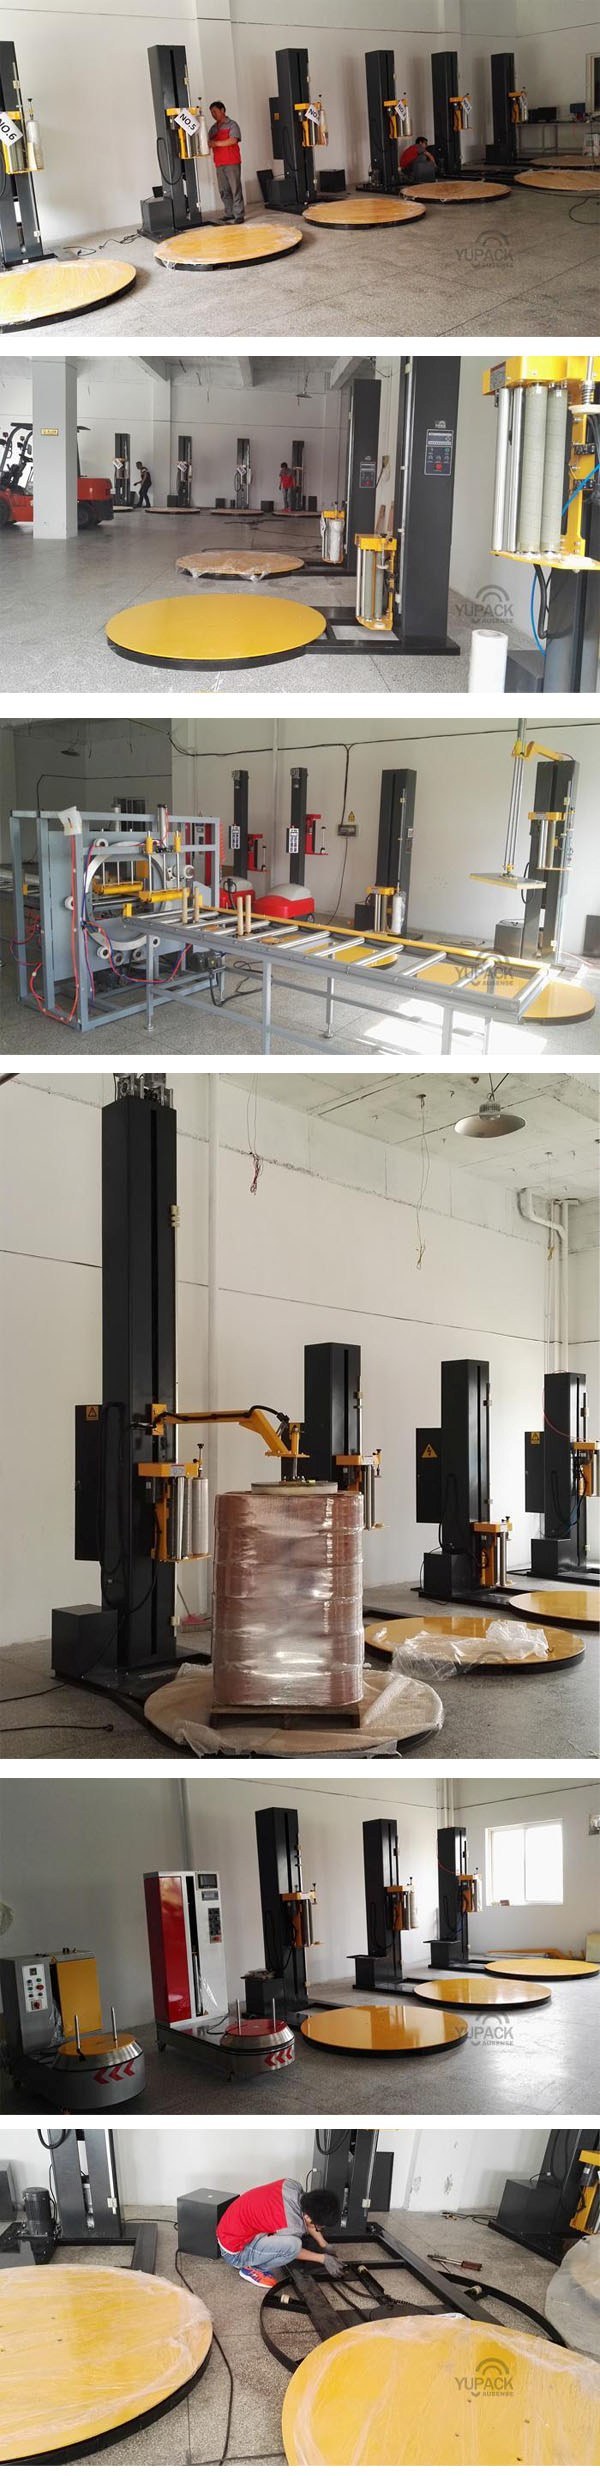 Full-Automatic Pallet Stretch Wrap Online PLC Programe Wrapping Machine